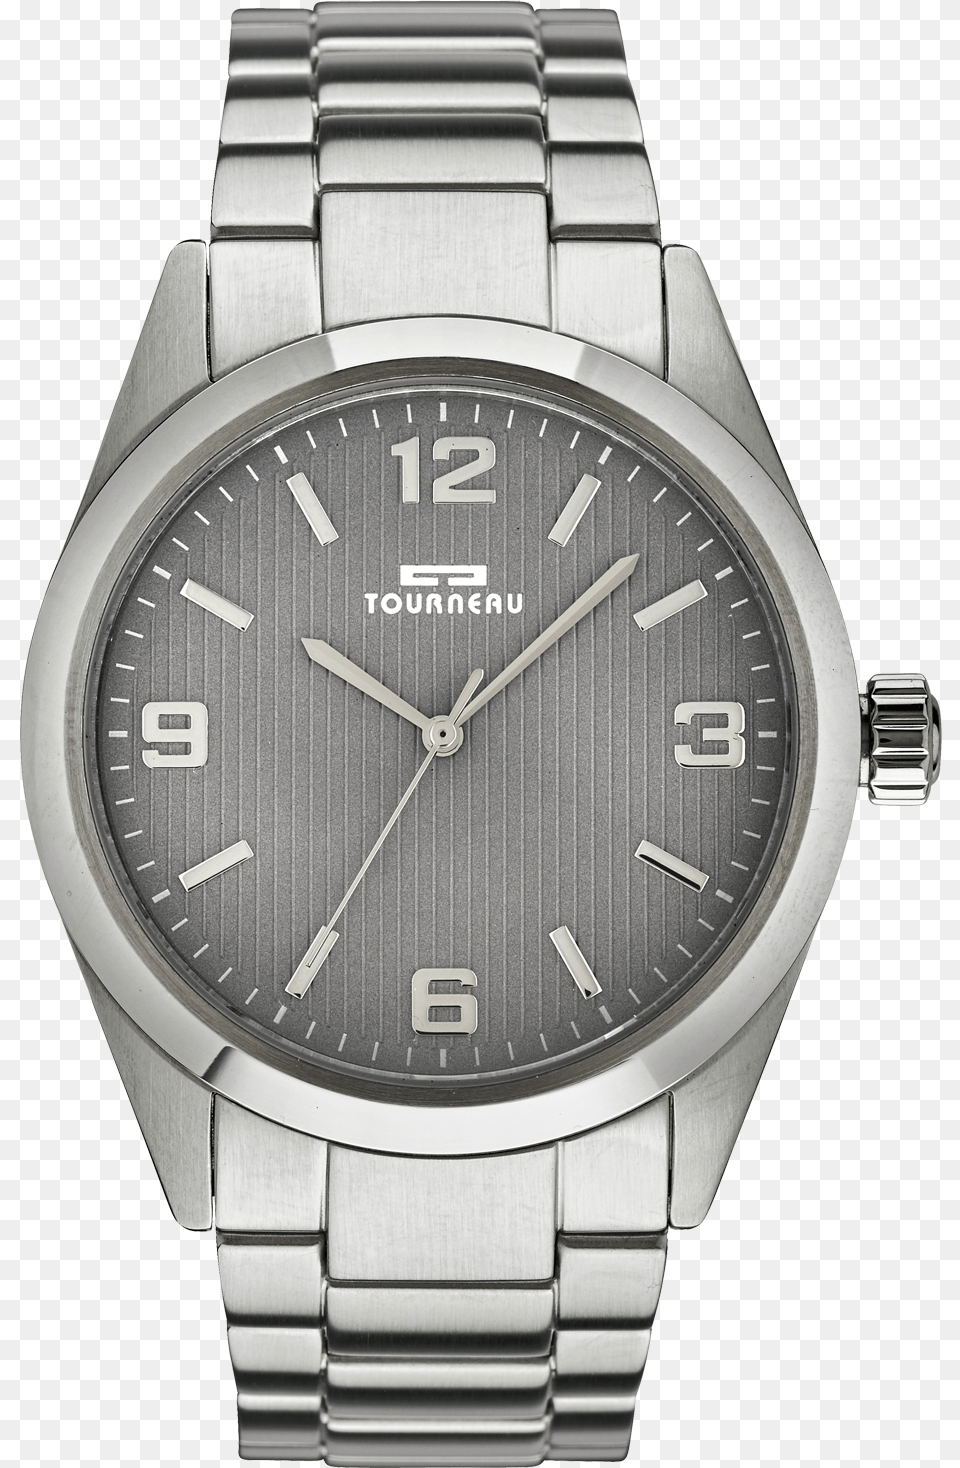 S Steel Gray Dial Tourneau, Arm, Body Part, Person, Wristwatch Png Image